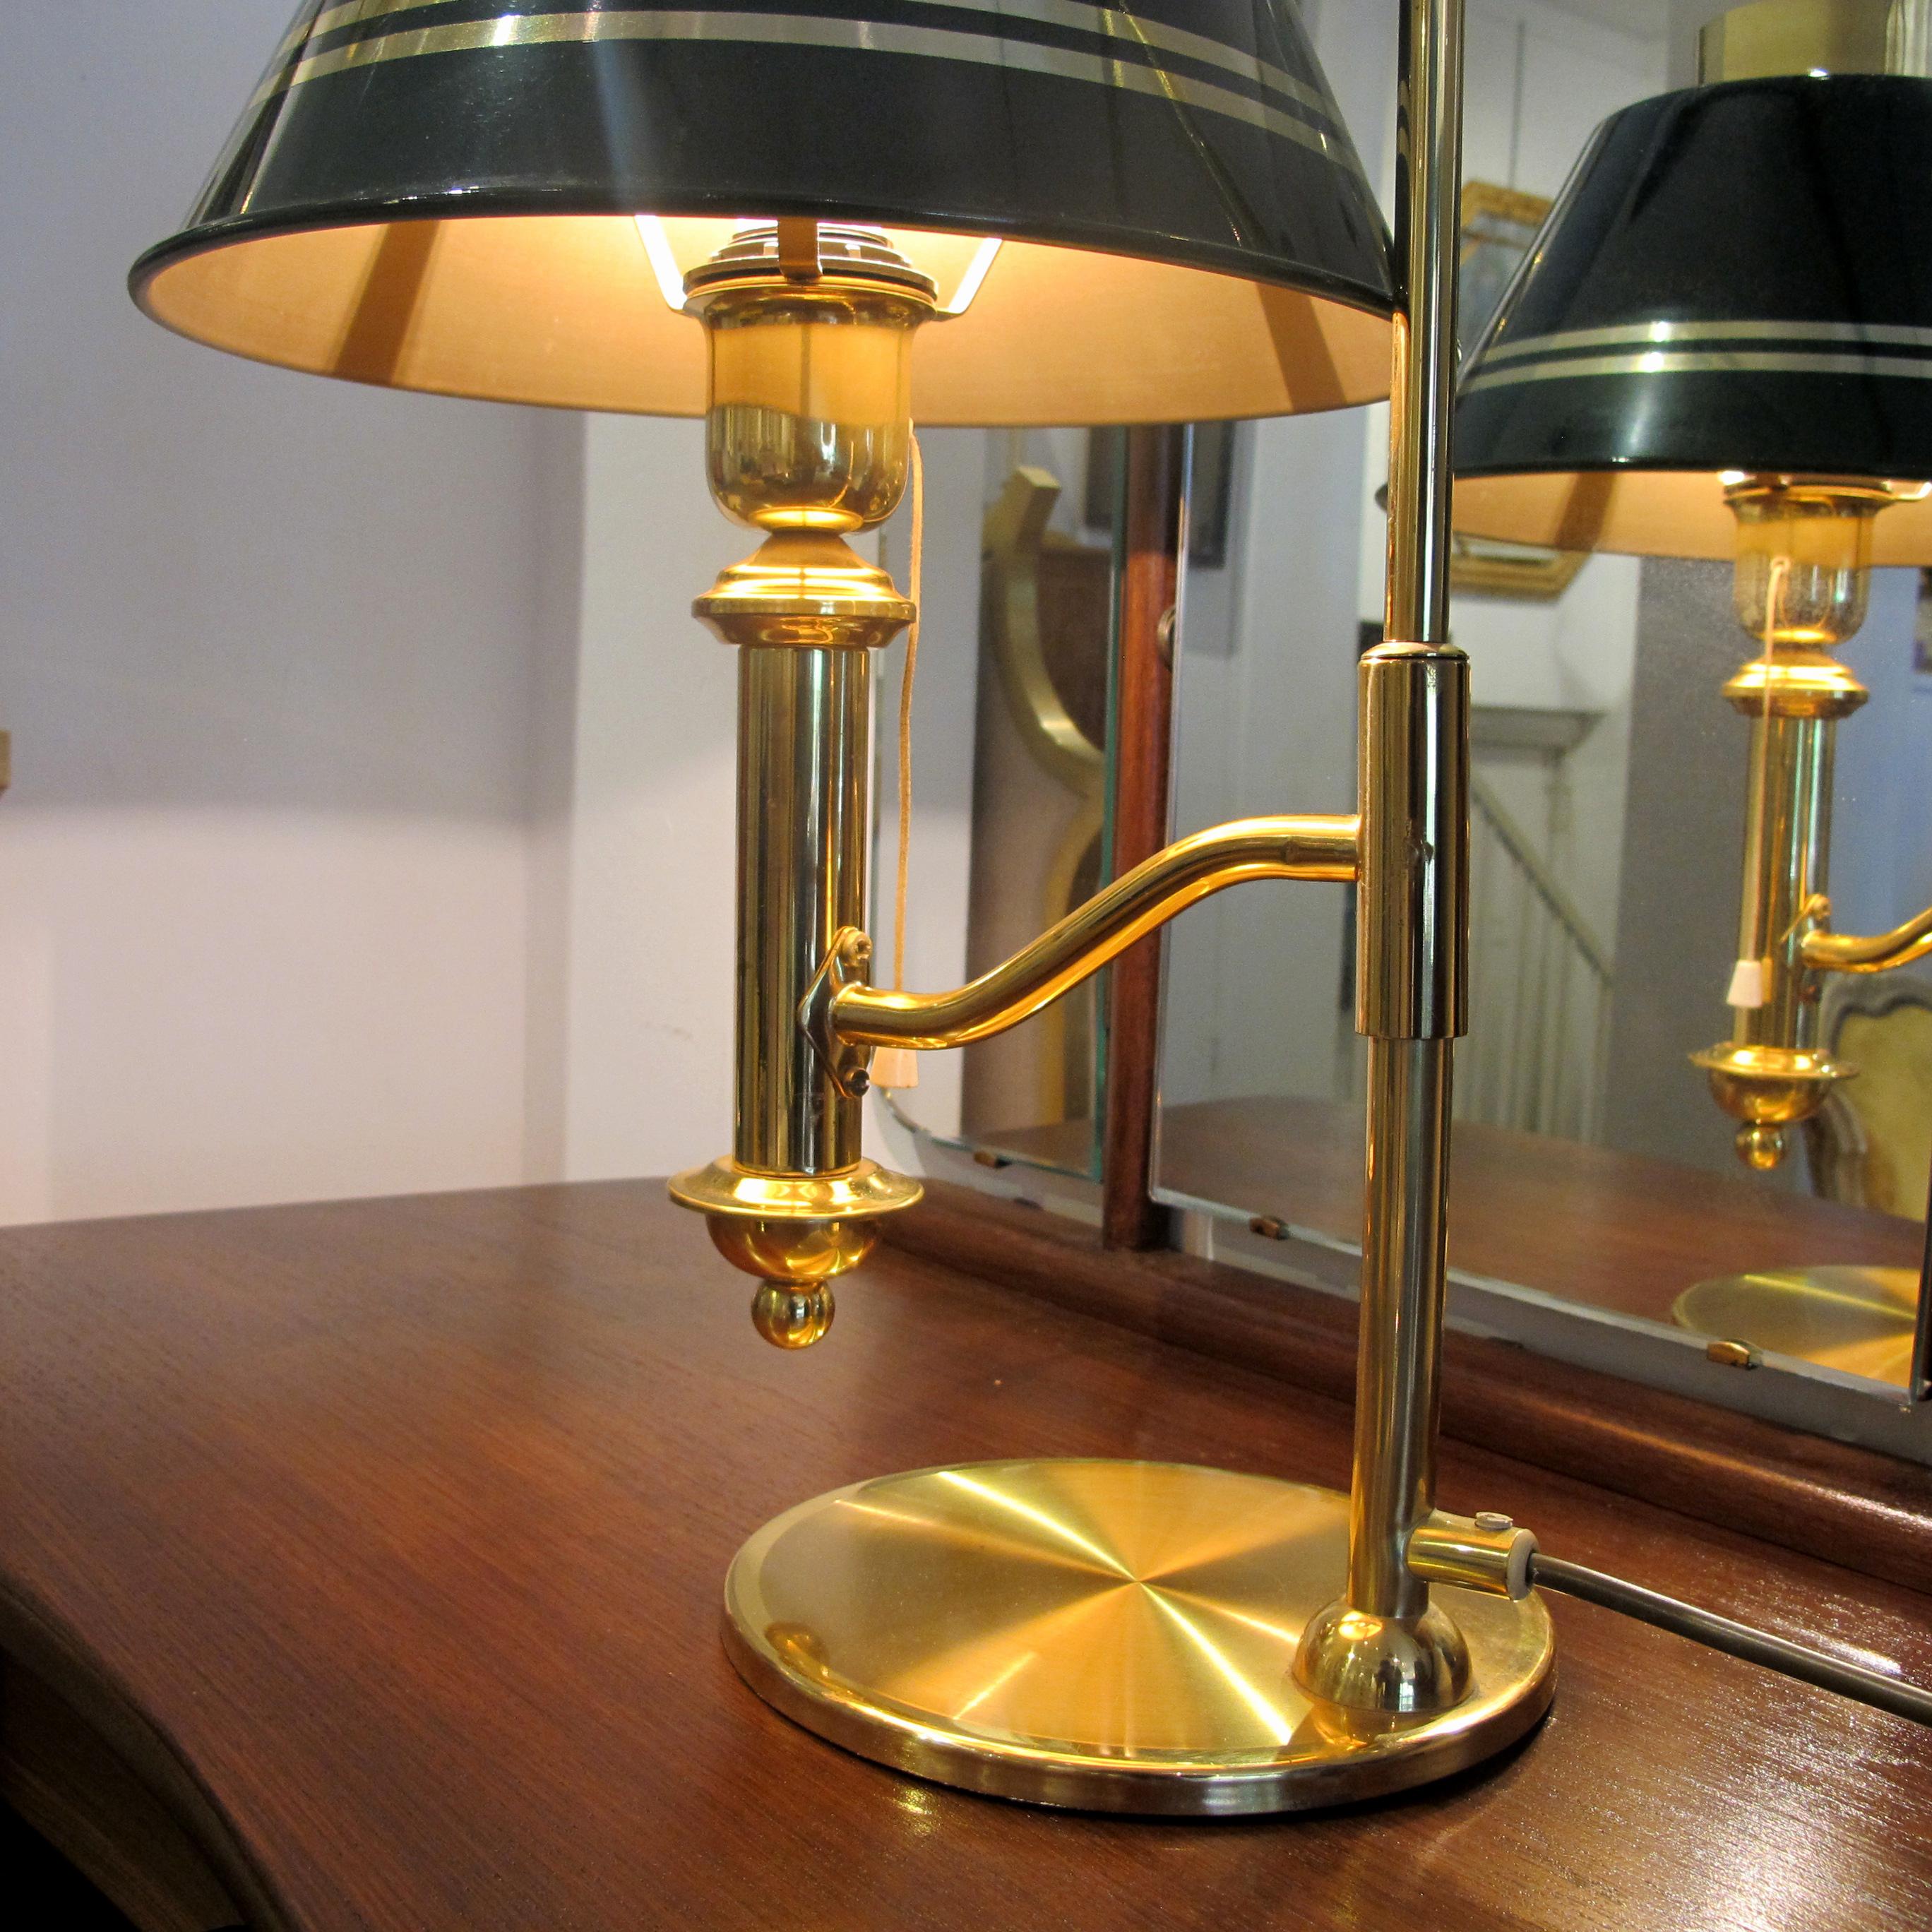 1970s Large Brass Desk Table Lamp with Green Metal Shade, Swedish For Sale 2